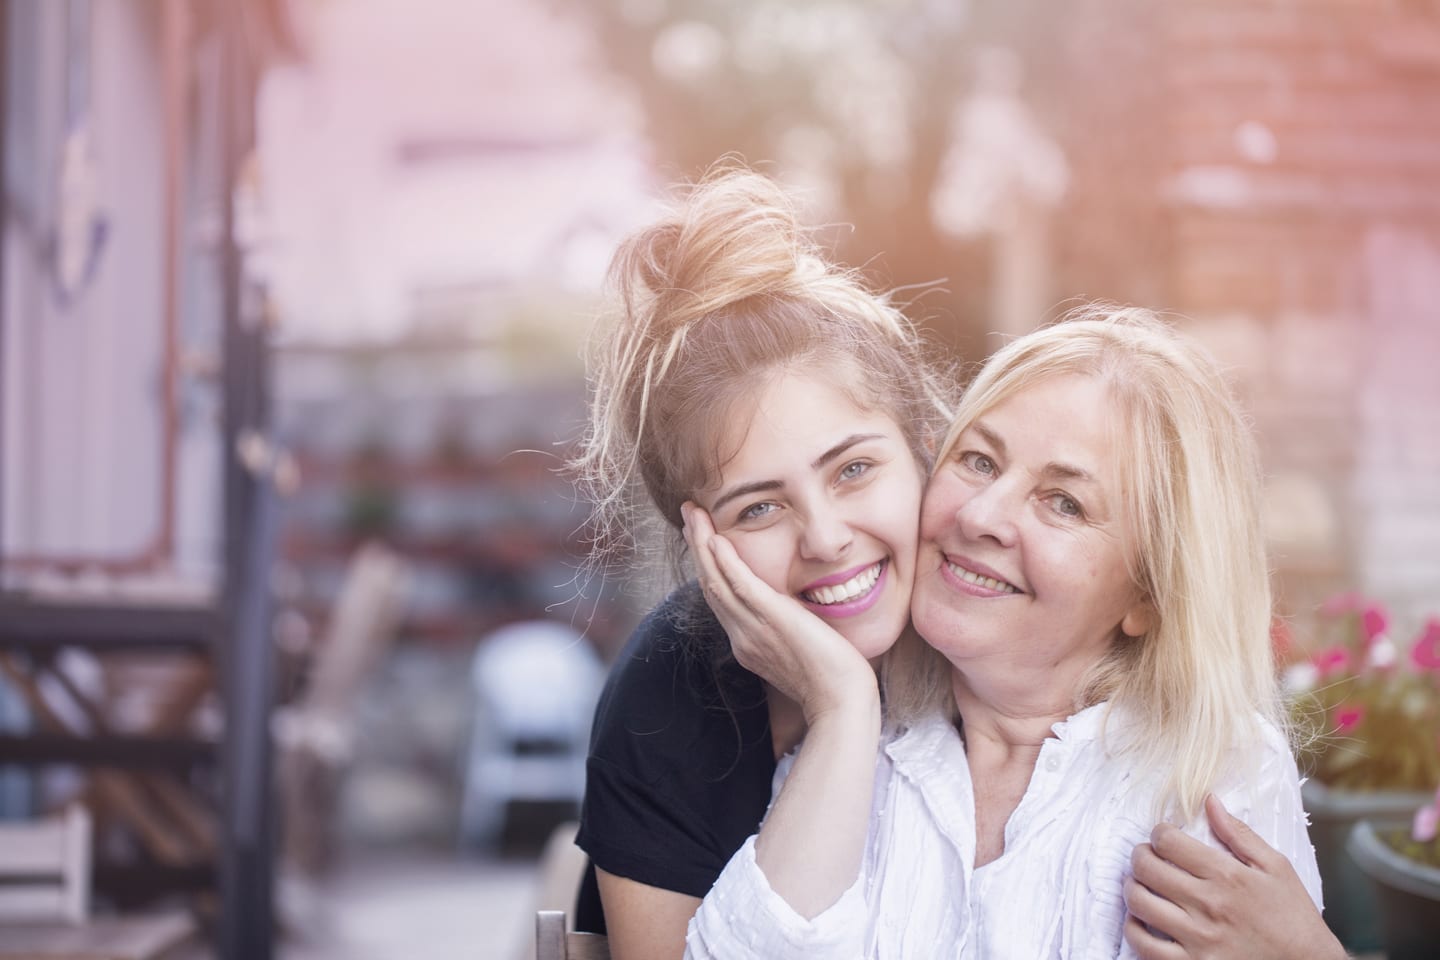 Happy mom and daughter embracing